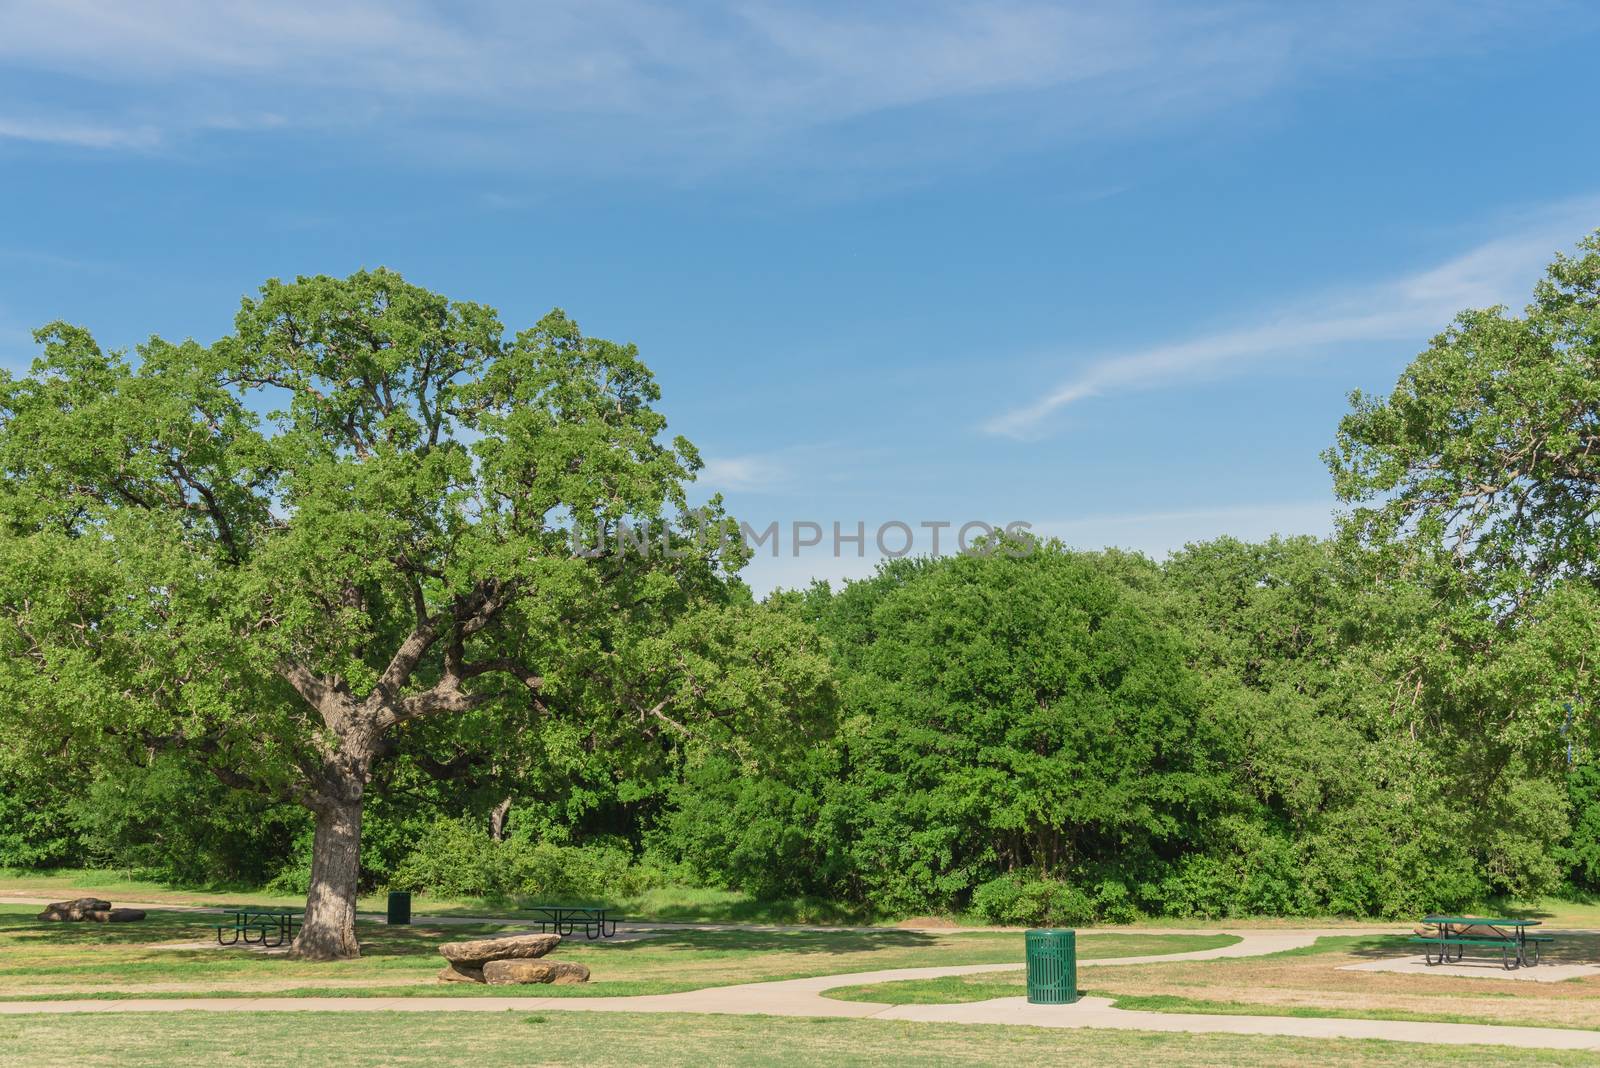 Public city park near Dallas, Texas, USA with picnic table, bin trash, trail and a lot of trees